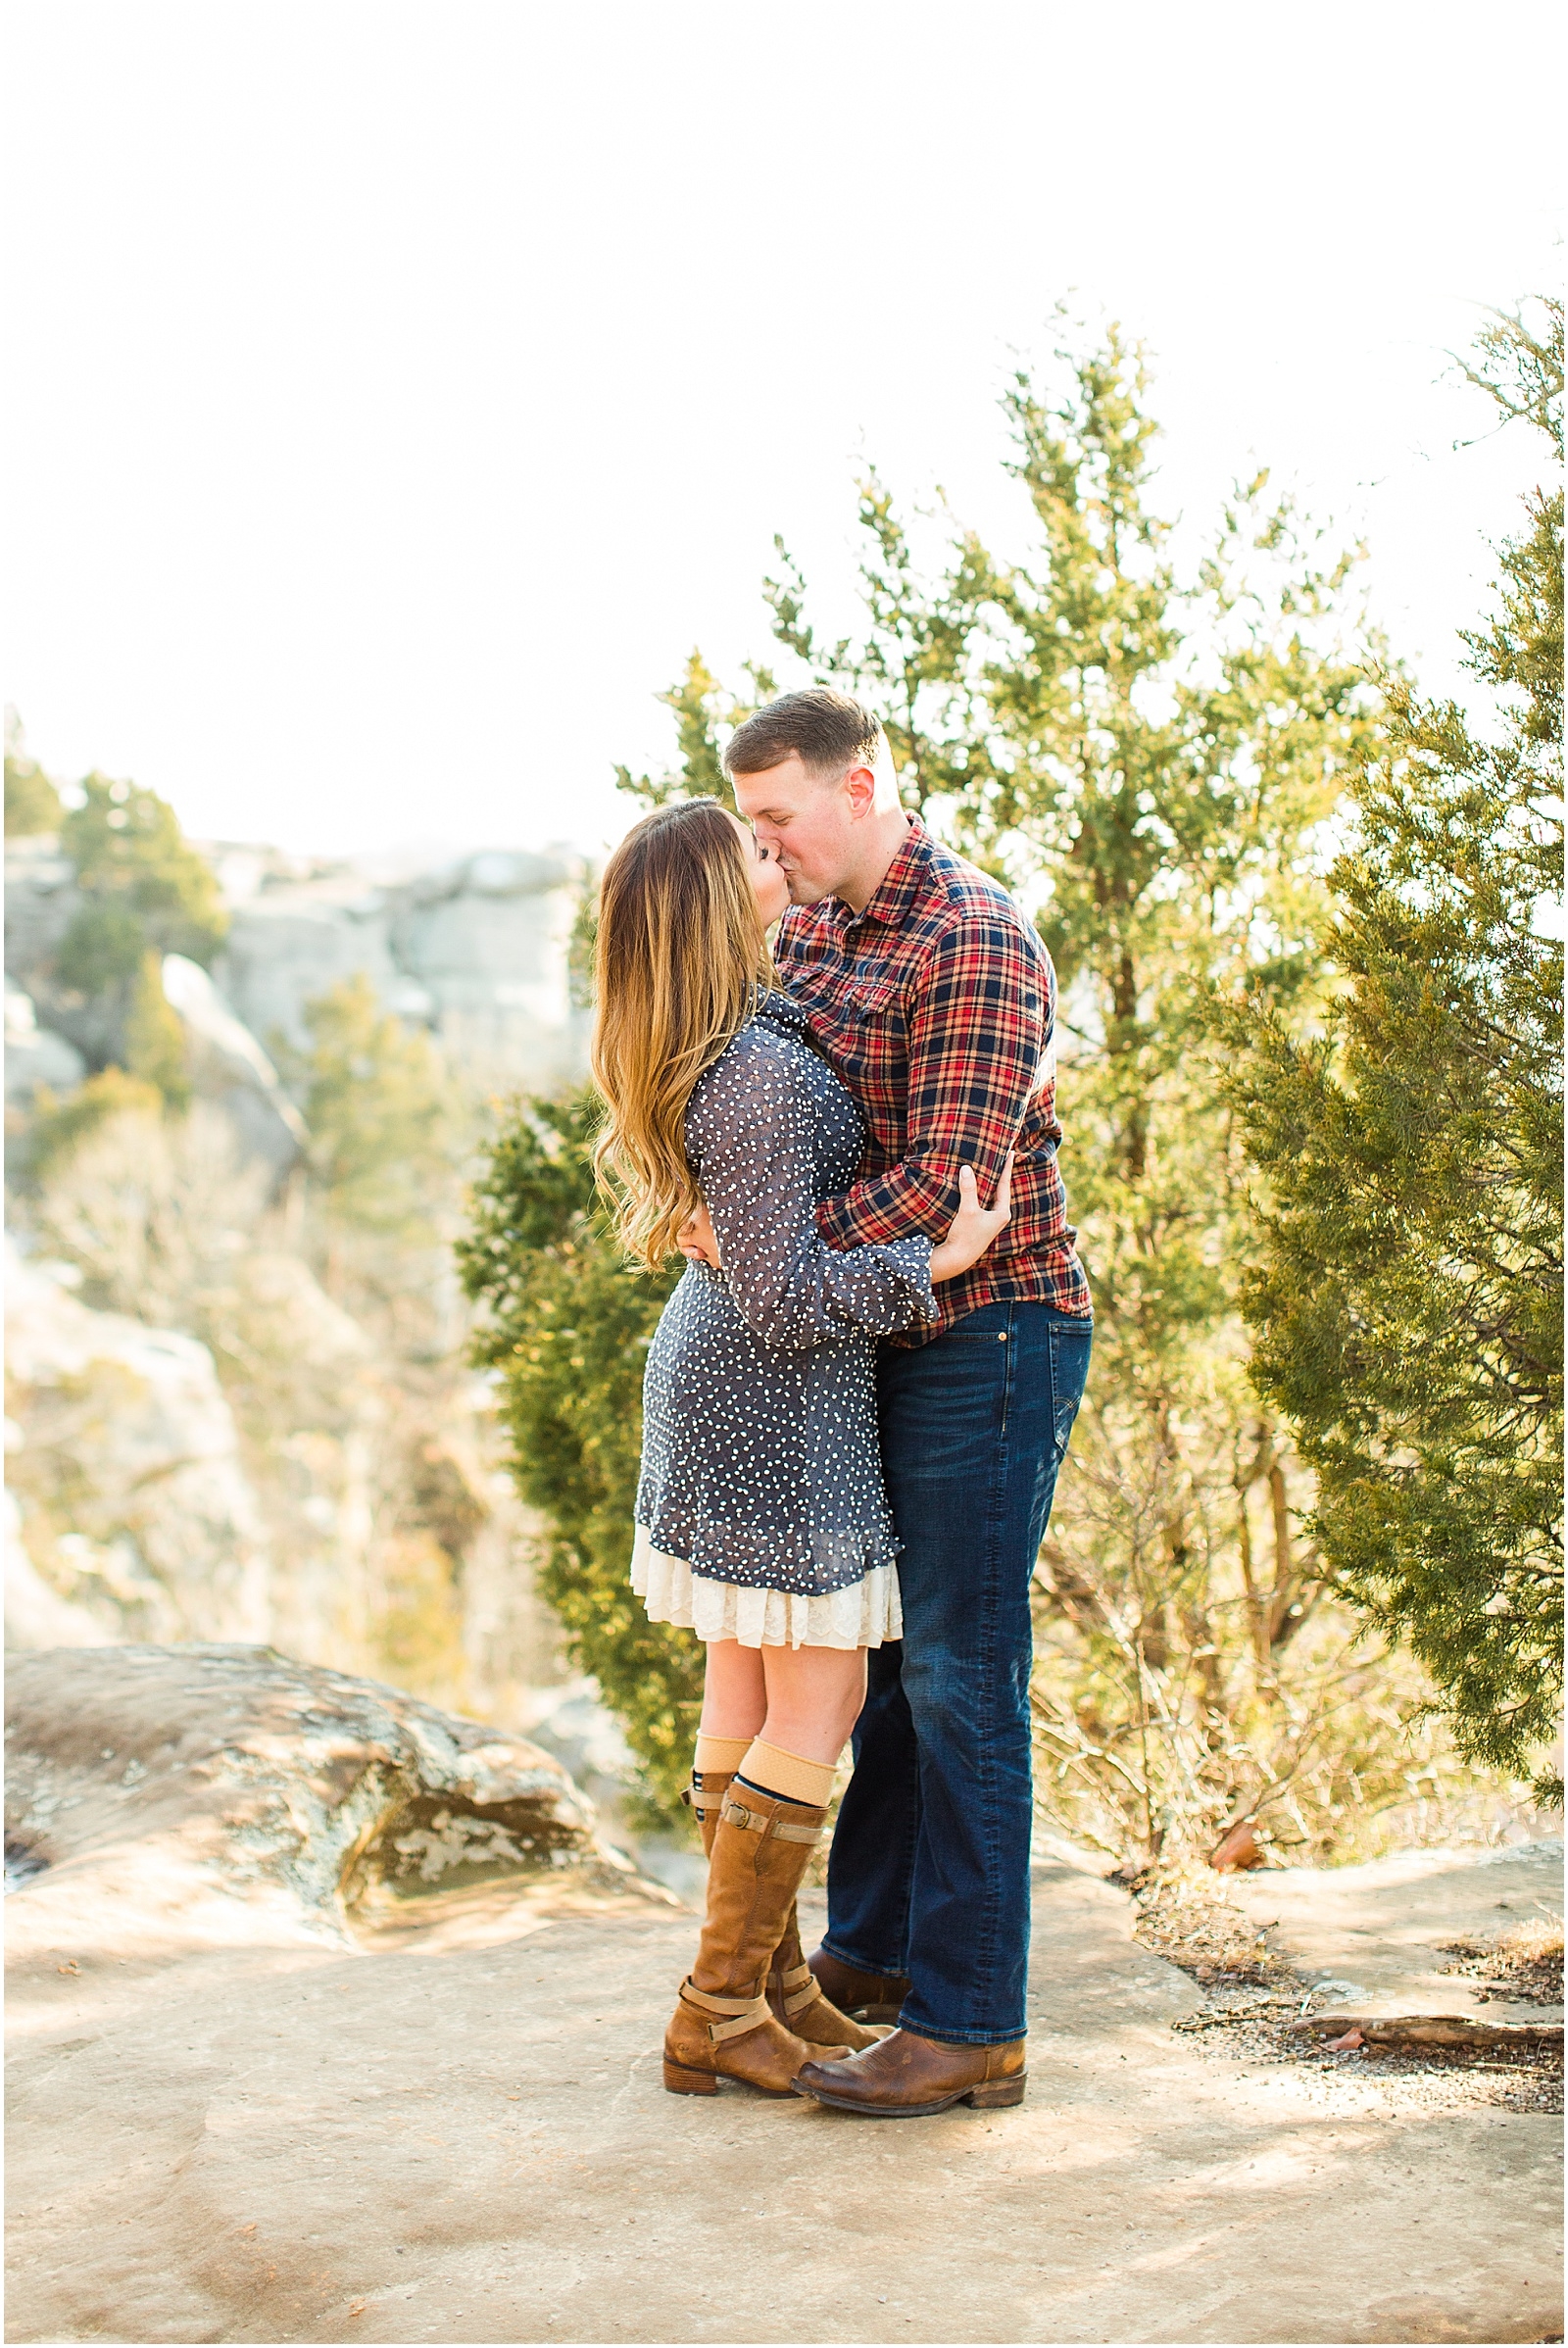 A Sunny Garden of the Gods Engagement Session | Shiloh and Lee | Bret and Brandie Photography002.jpg